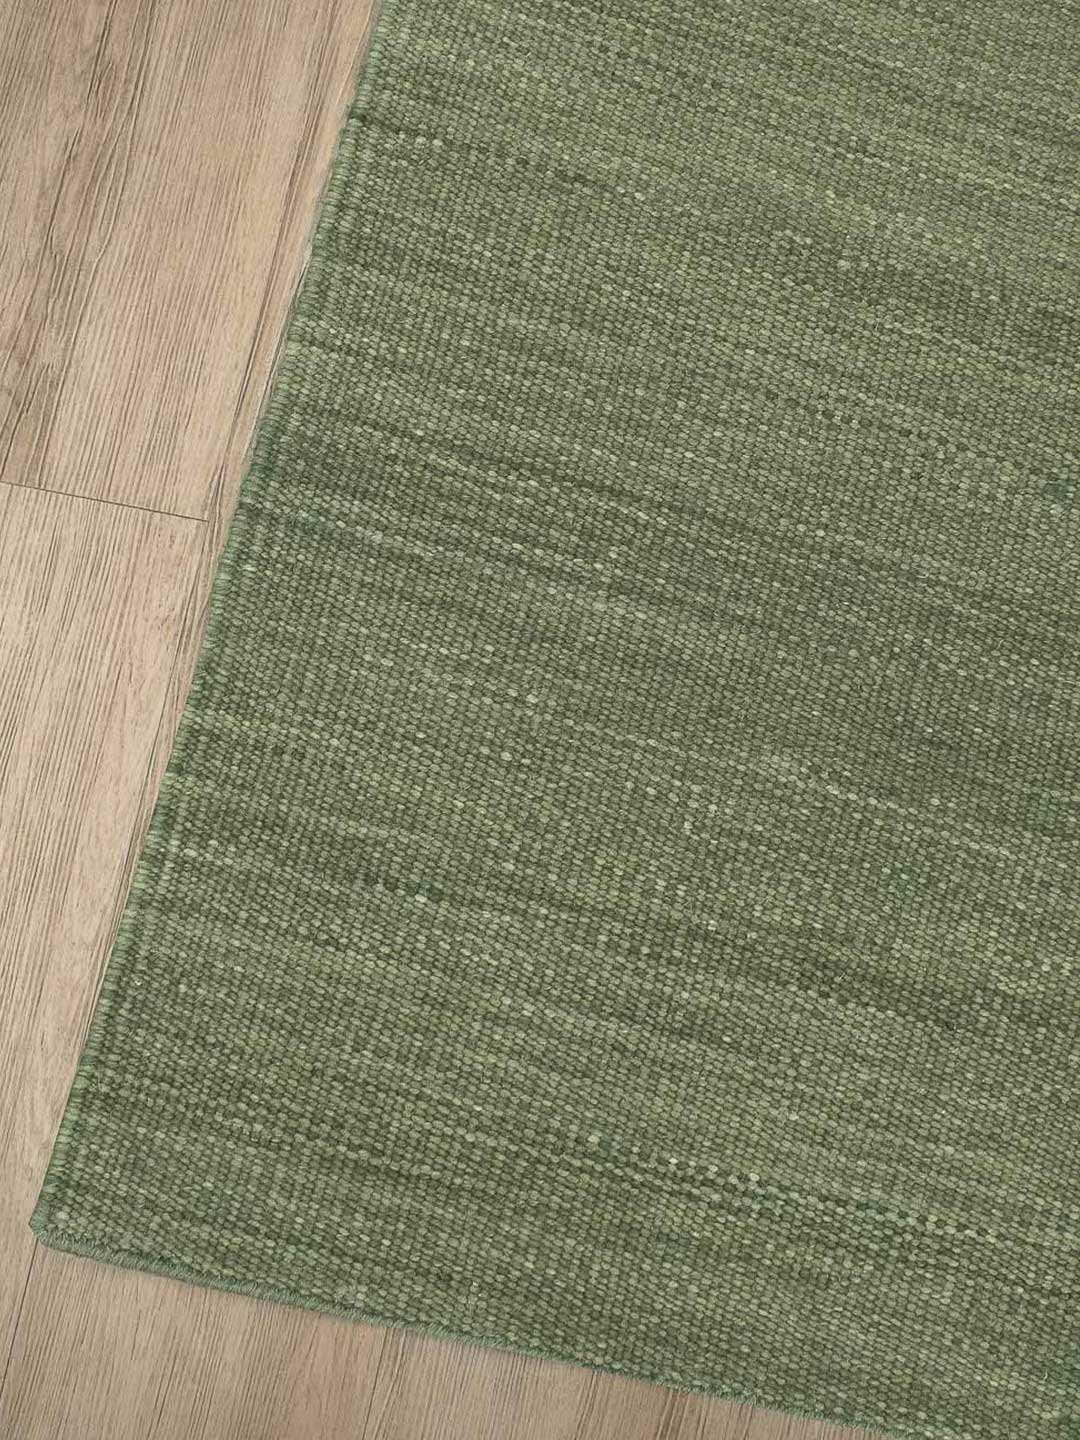 Yarra Rug Moss is 20% off from the Rug Collection Stockist Make Your House A Home, Furniture Store Bendigo. Free Australia Wide Delivery